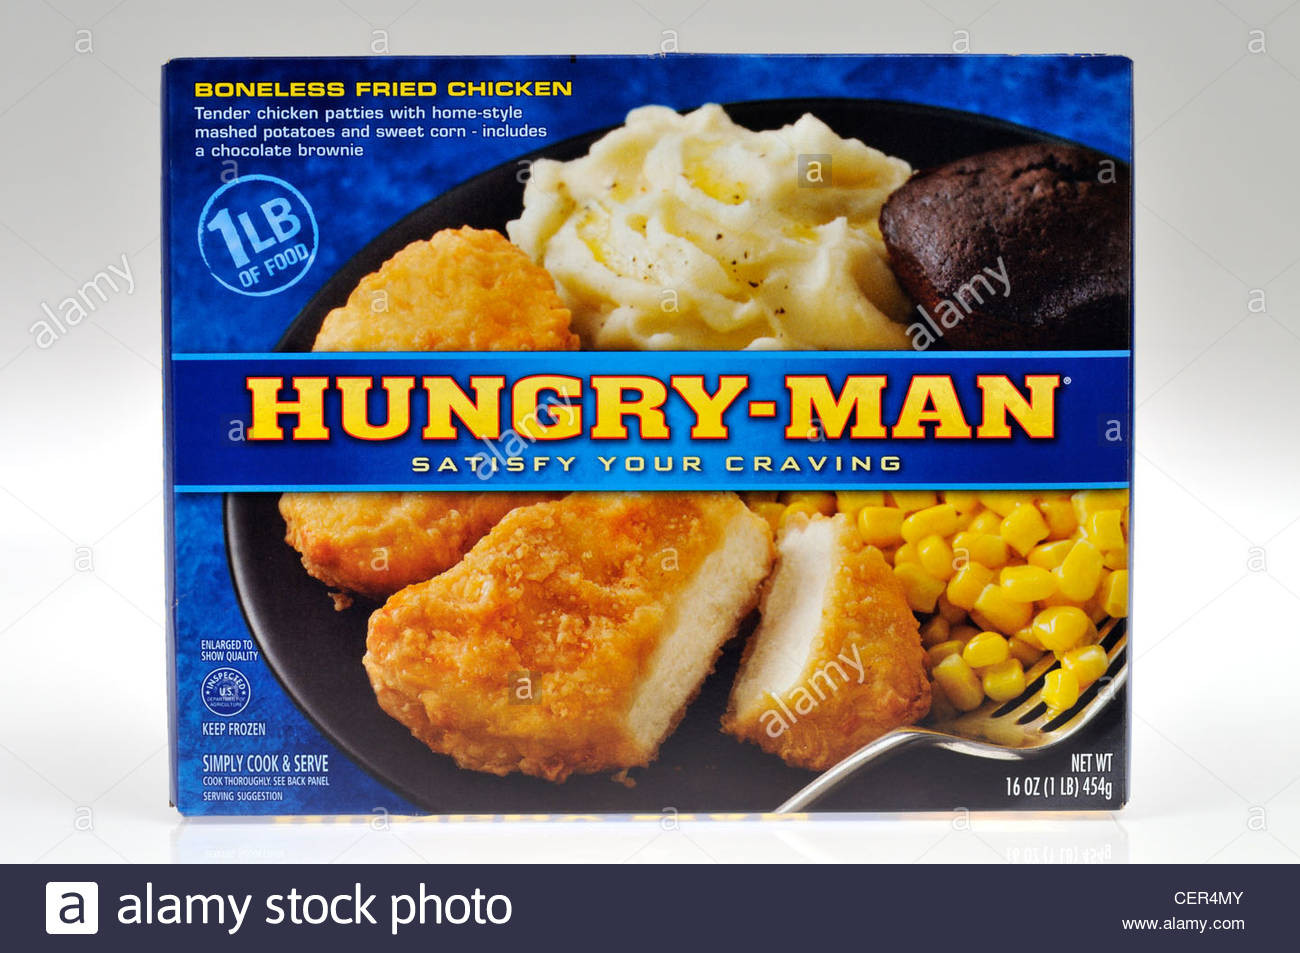 Hungry Man Frozen Dinners
 Packaging of Swanson Hungry Man Fried Chicken frozen TV